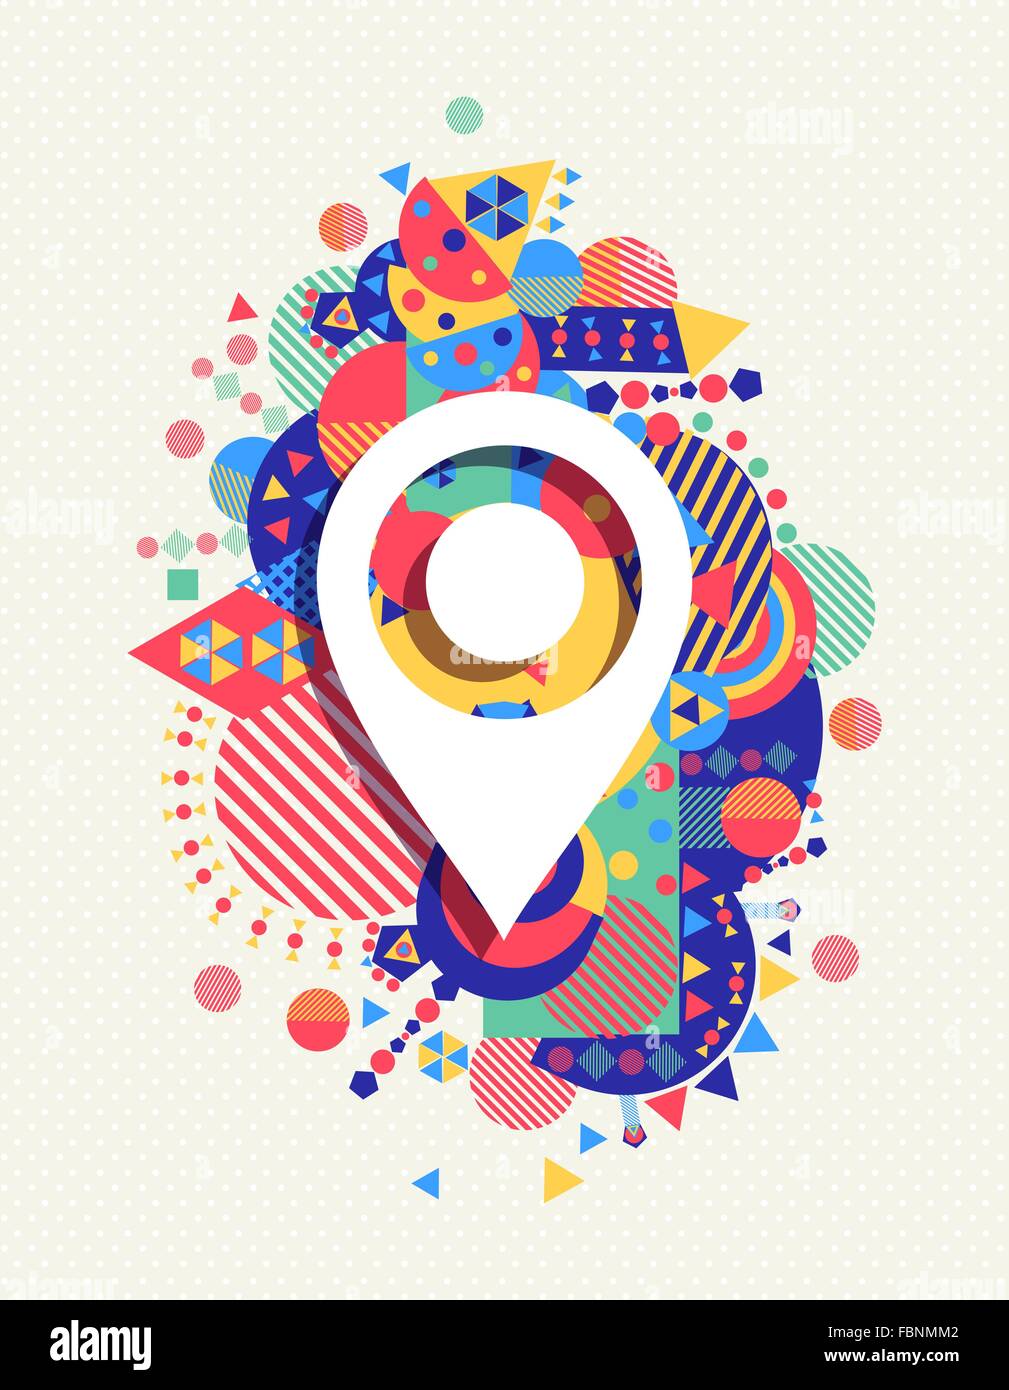 Gps pointer map icon poster design with colorful vibrant geometry shapes background. Social media concept. EPS10 vector. Stock Vector